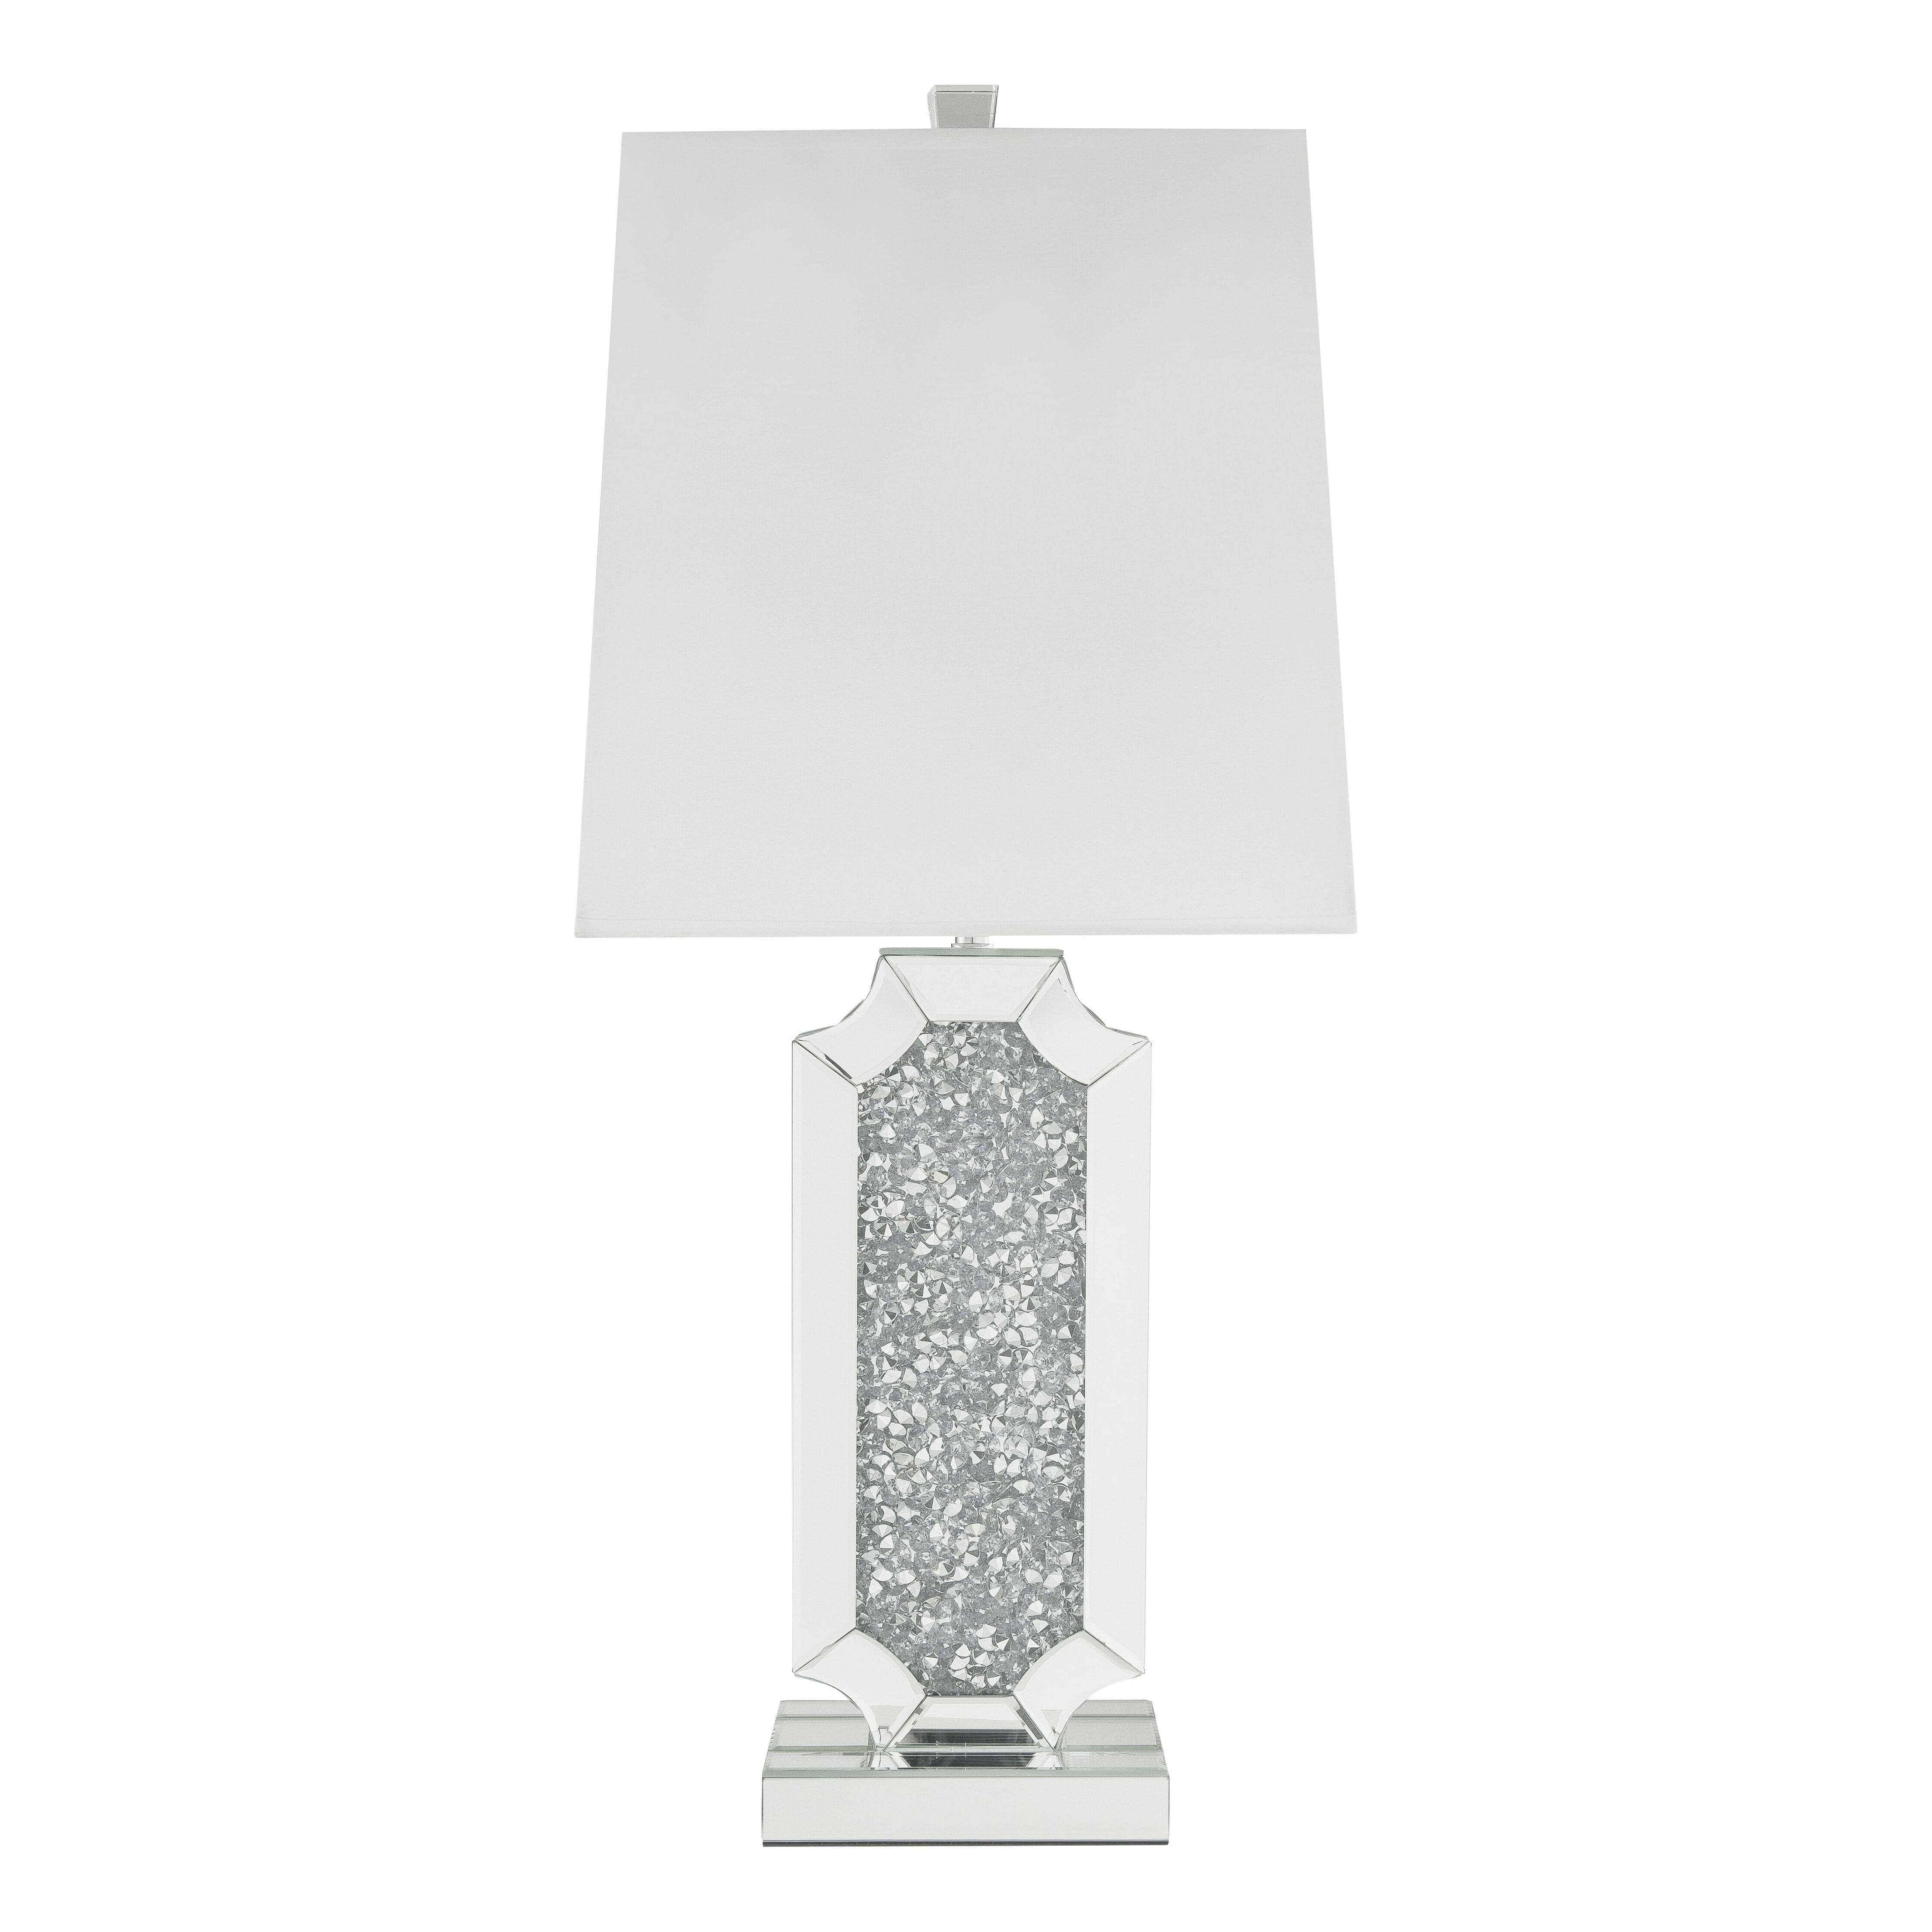 Benzara Mirrorred Base Wooden Table Lamp With Square Shade, White And Silver By Benzara Table Lamps BM204602